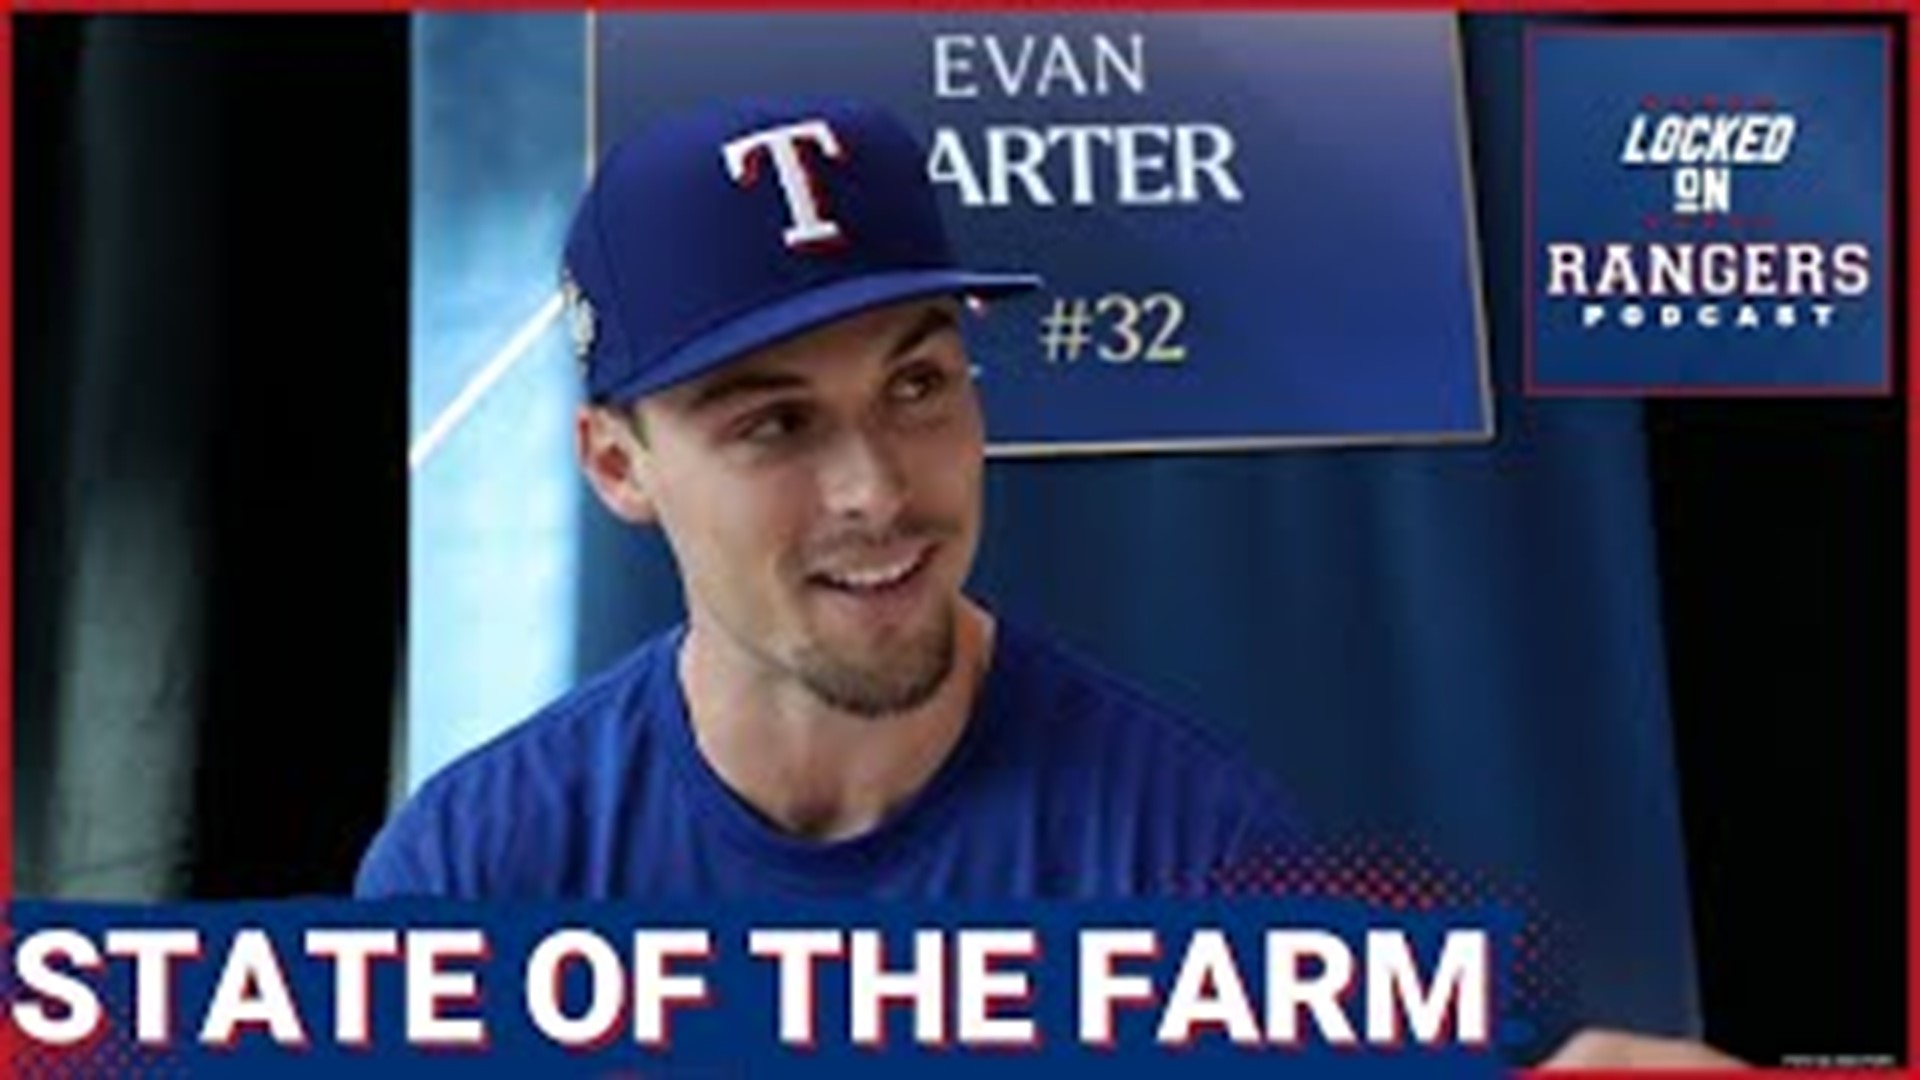 The Texas Rangers' World Series run gave fans their greatest dream after many years of heartbreak, but does the farm system still have top-end talent.